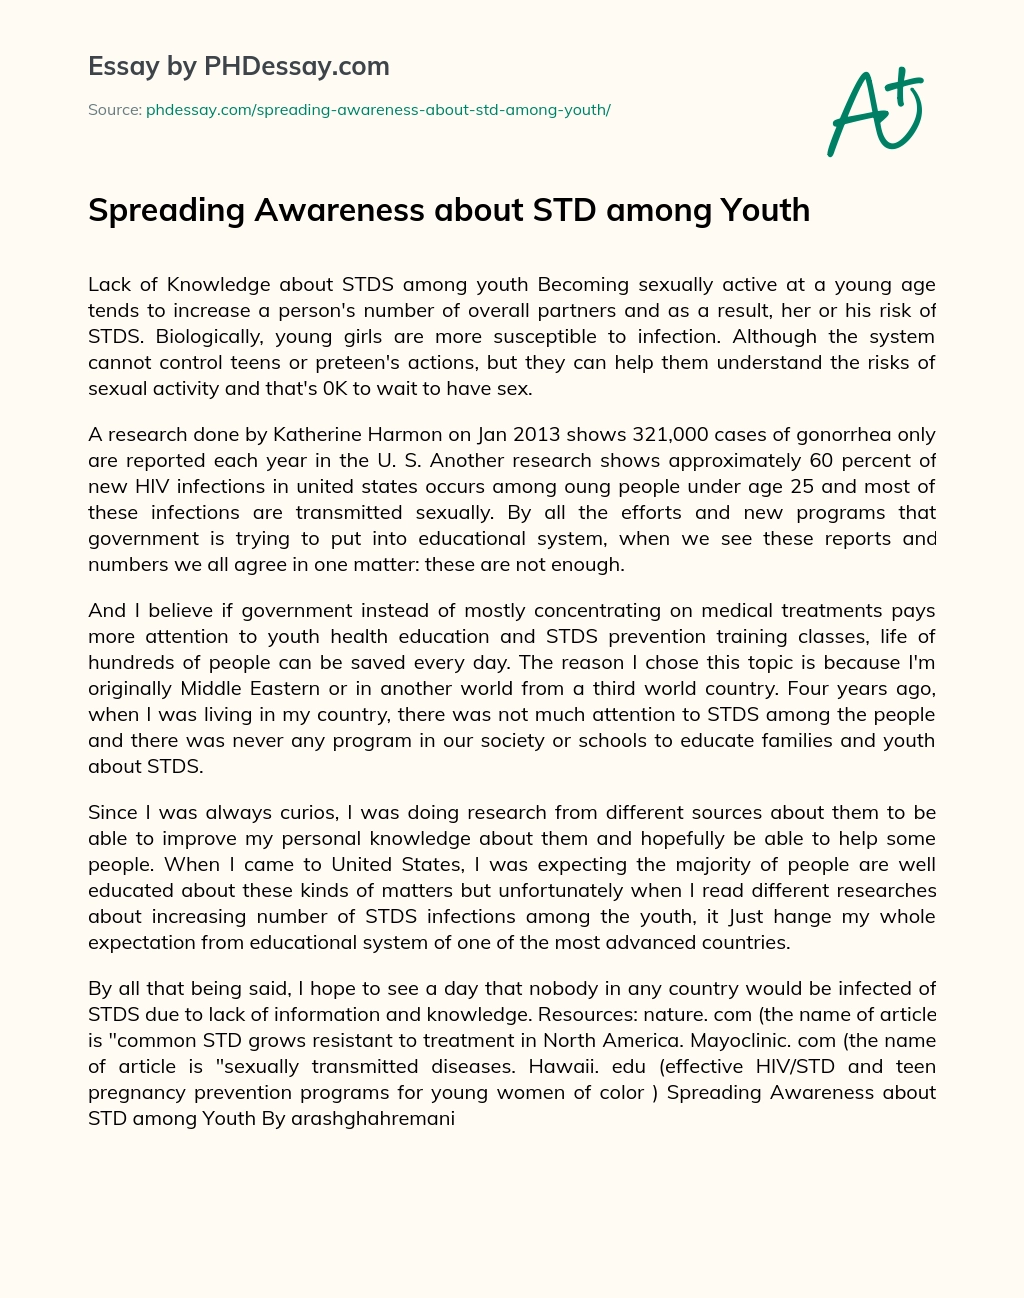 Spreading Awareness about STD among Youth essay